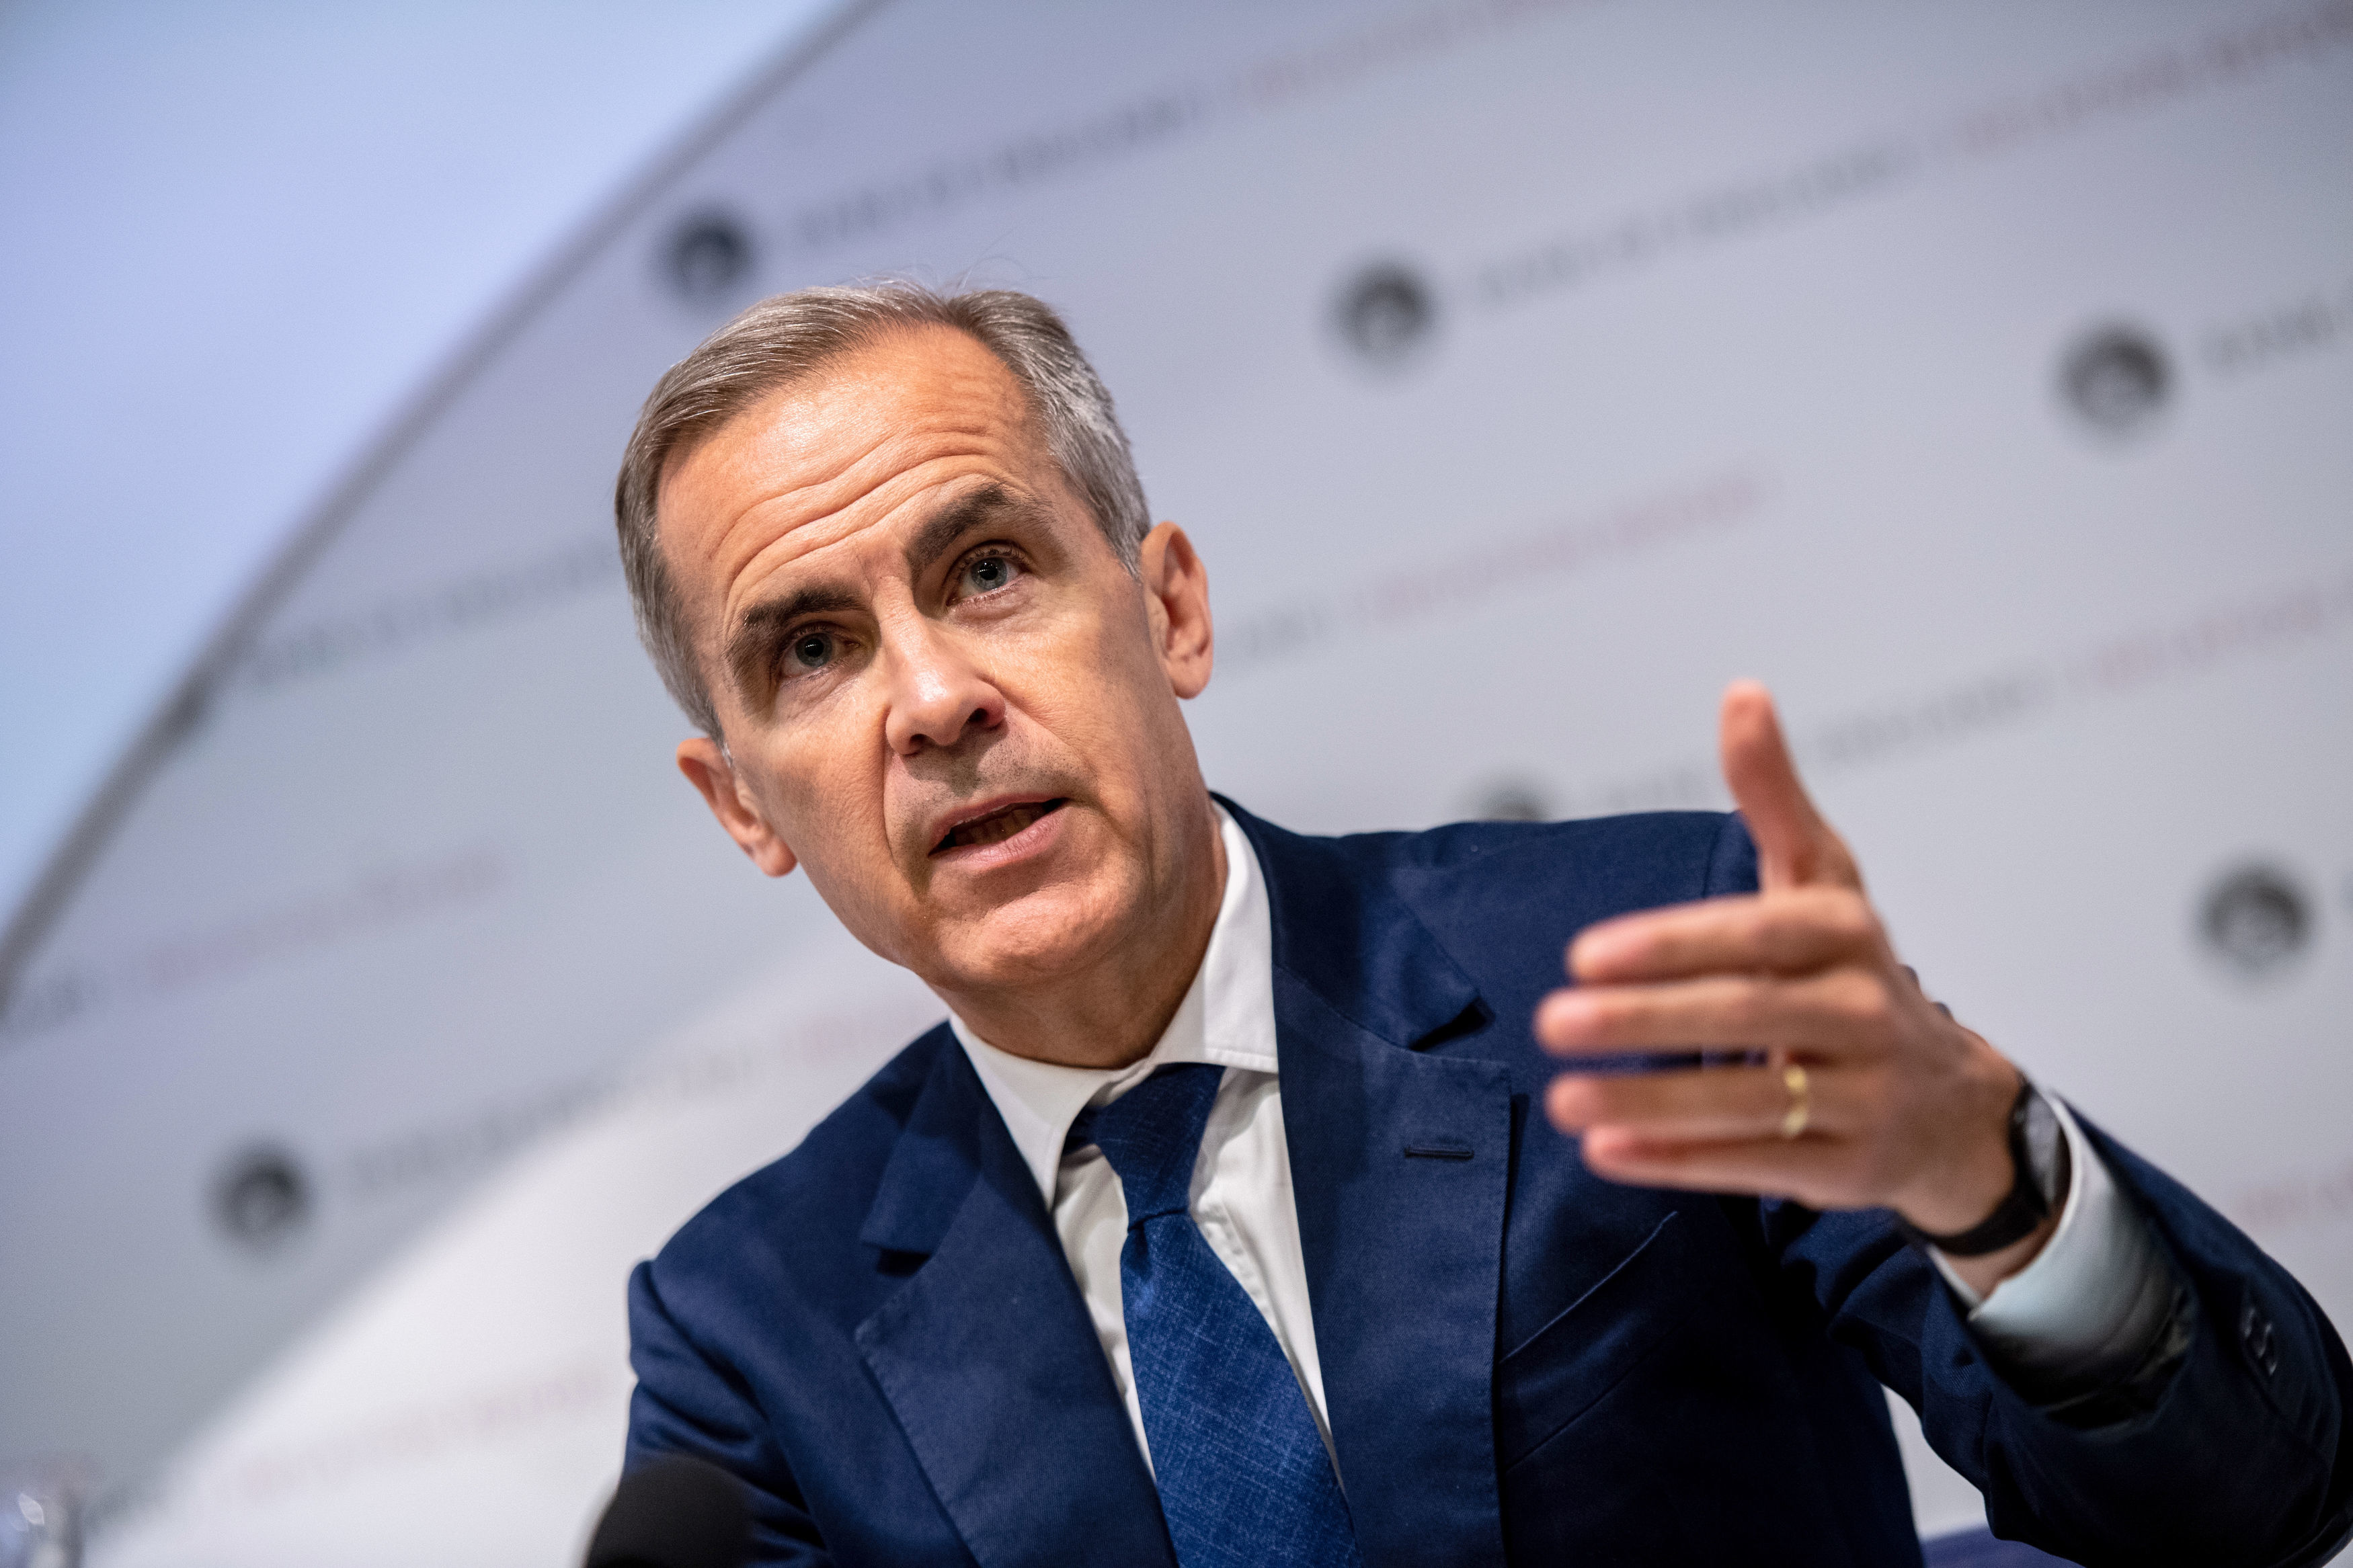 Governor of the Bank of England, Mark Carney, speaking at the Bank of England interest rate decision and inflation report press conference at the Bank of England in London. (Chris J Ratcliffe/PA)